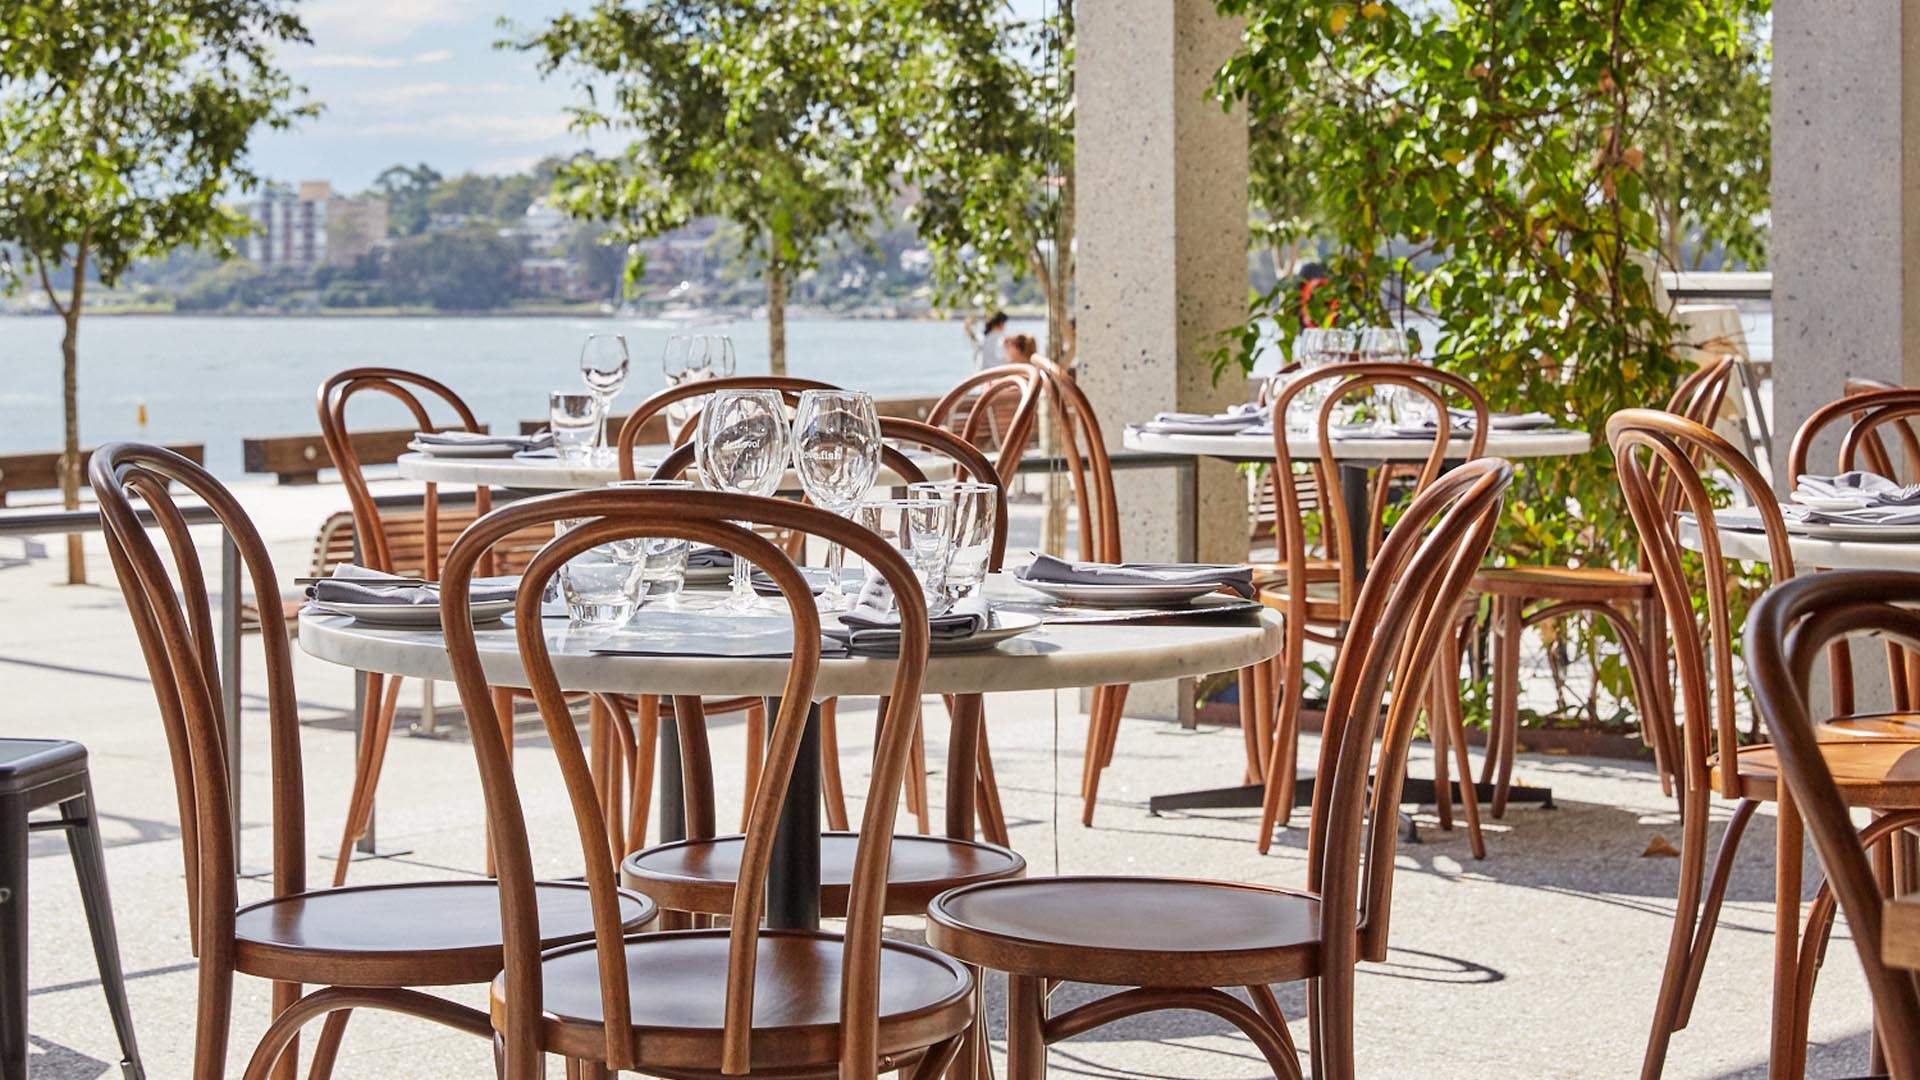 Outdoor dining at Love Fish - a seafood restaurant in Sydney.